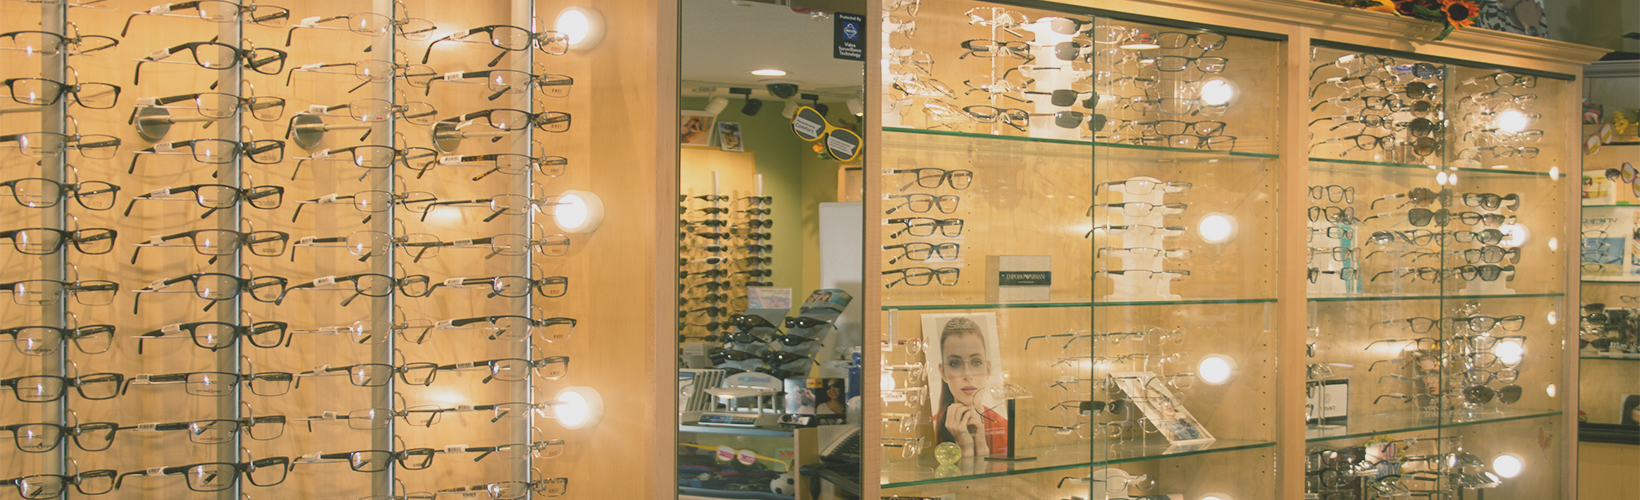 eyeglasses lot in clear glass display case